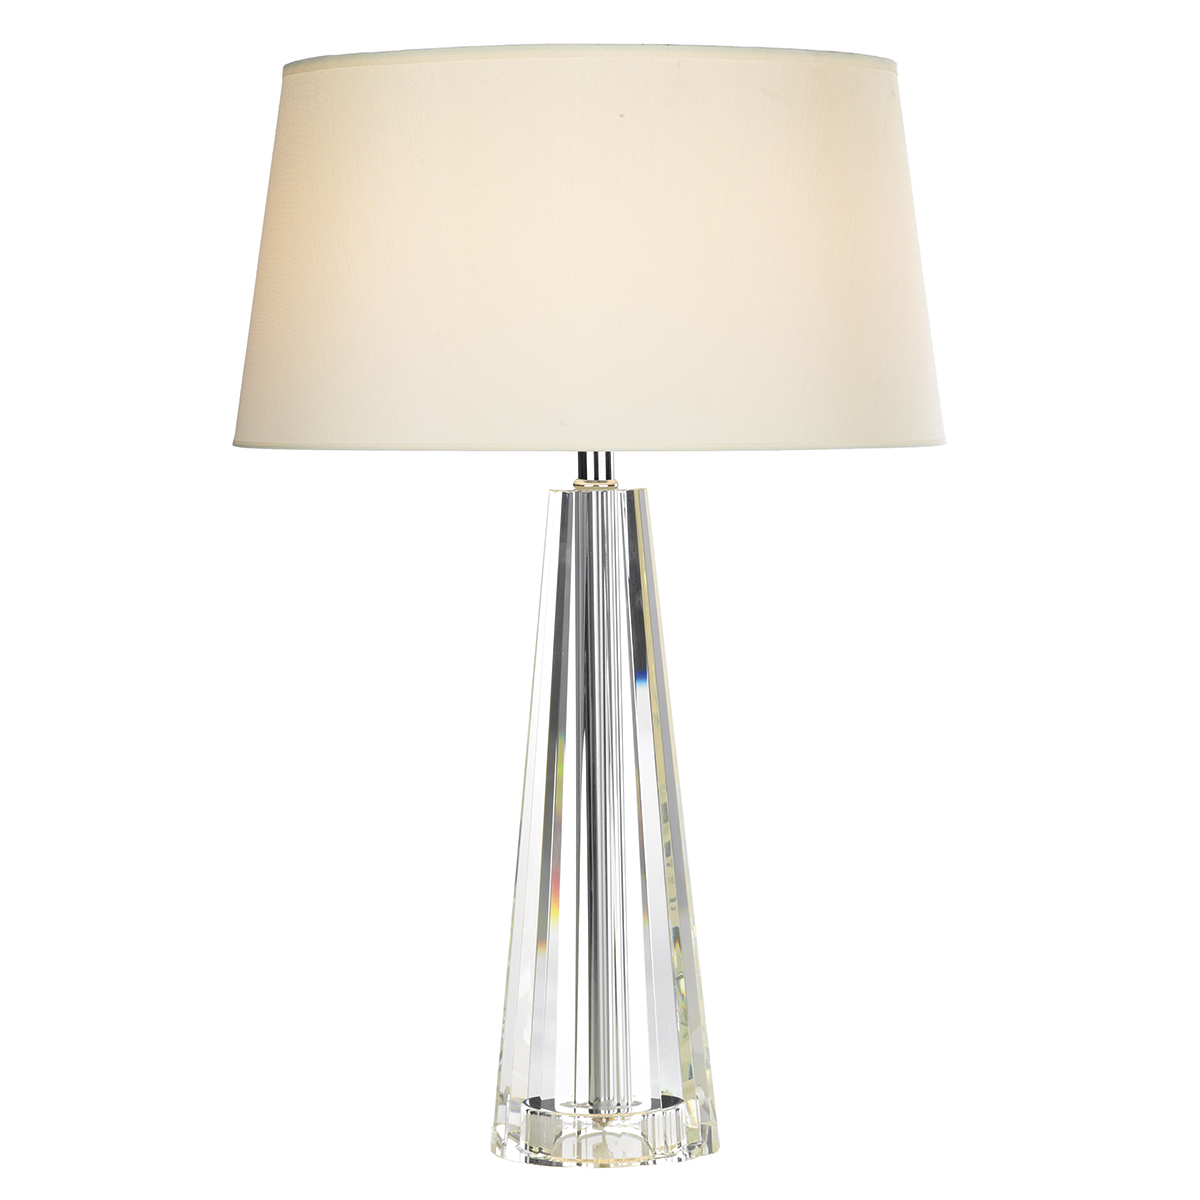 Cyprus Table Lamp Tapered Crystal C W, 32 Inch Crystal Table Lamps